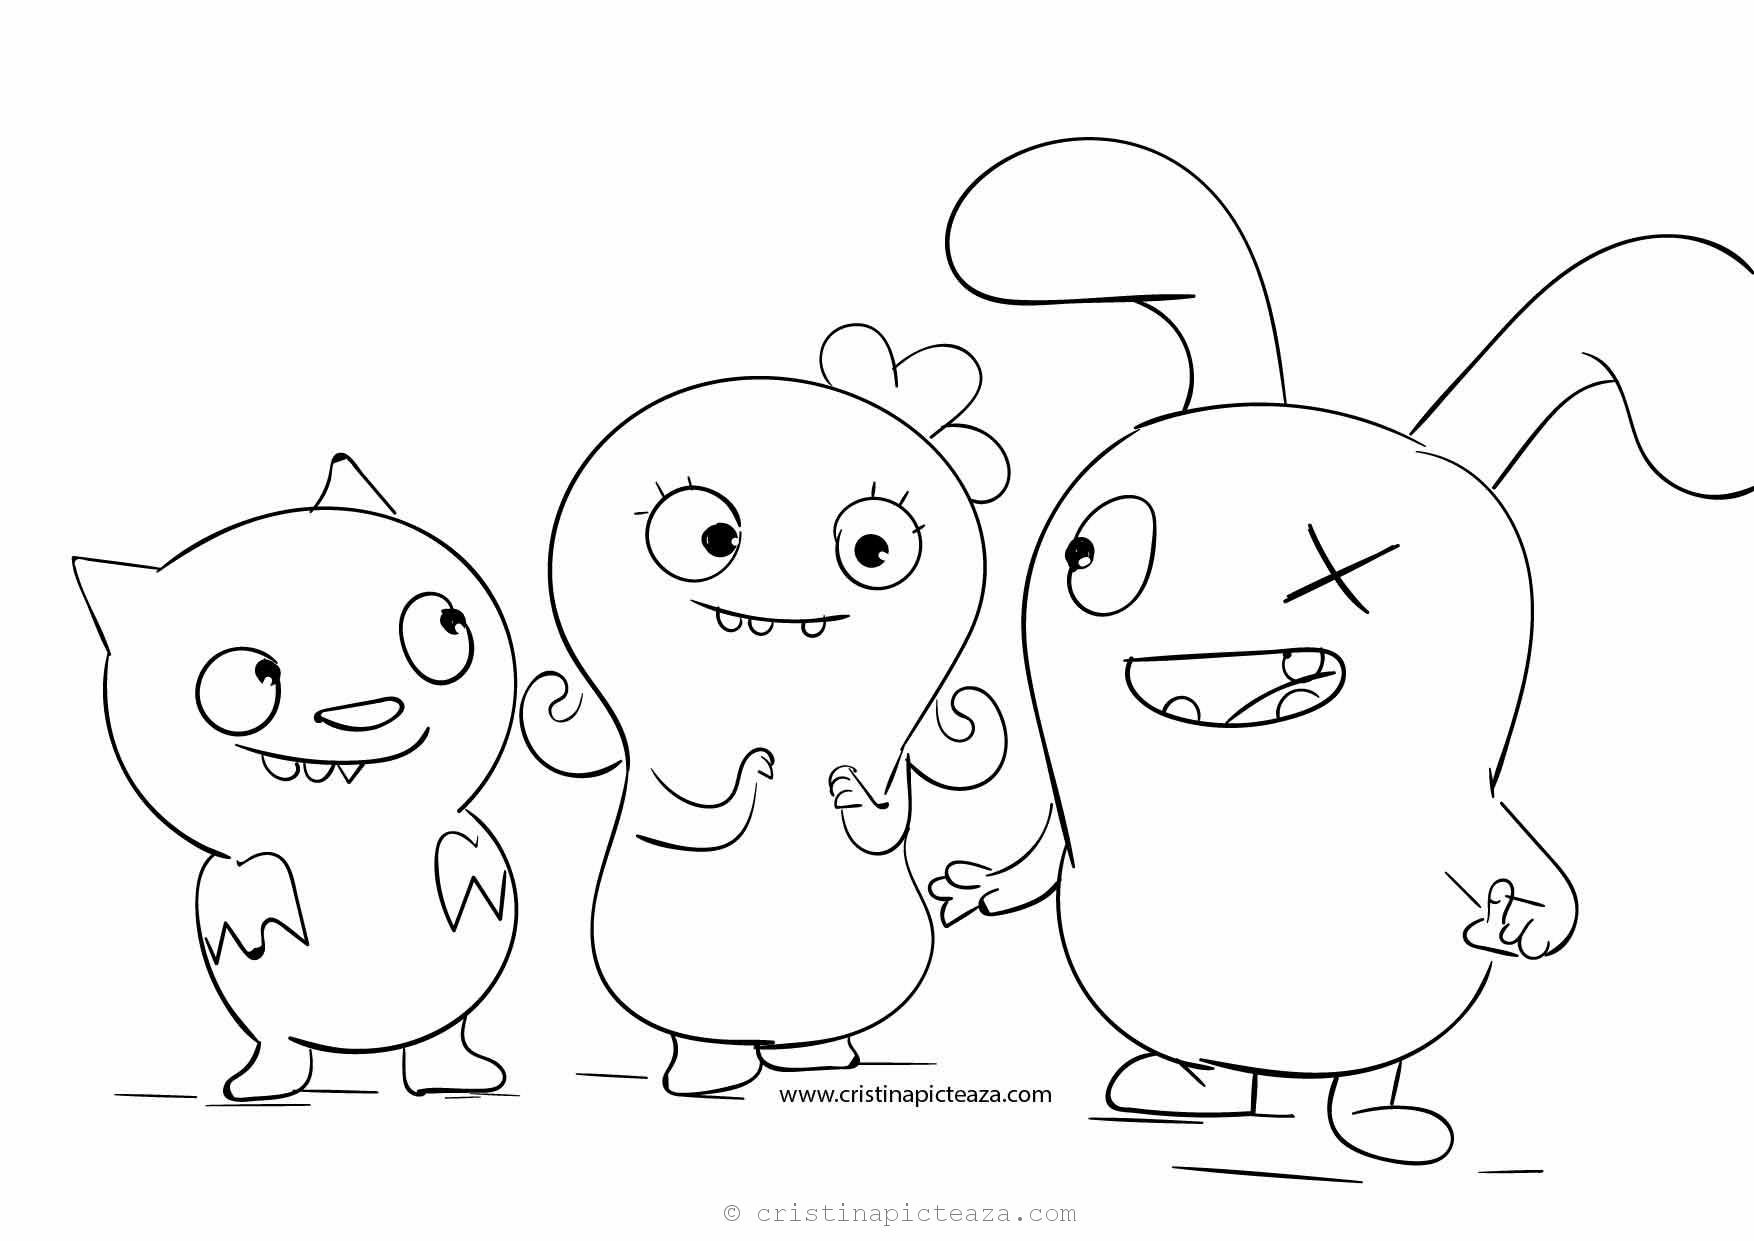 Ugly Dolls Coloring pages – Download Uglydolls for coloring